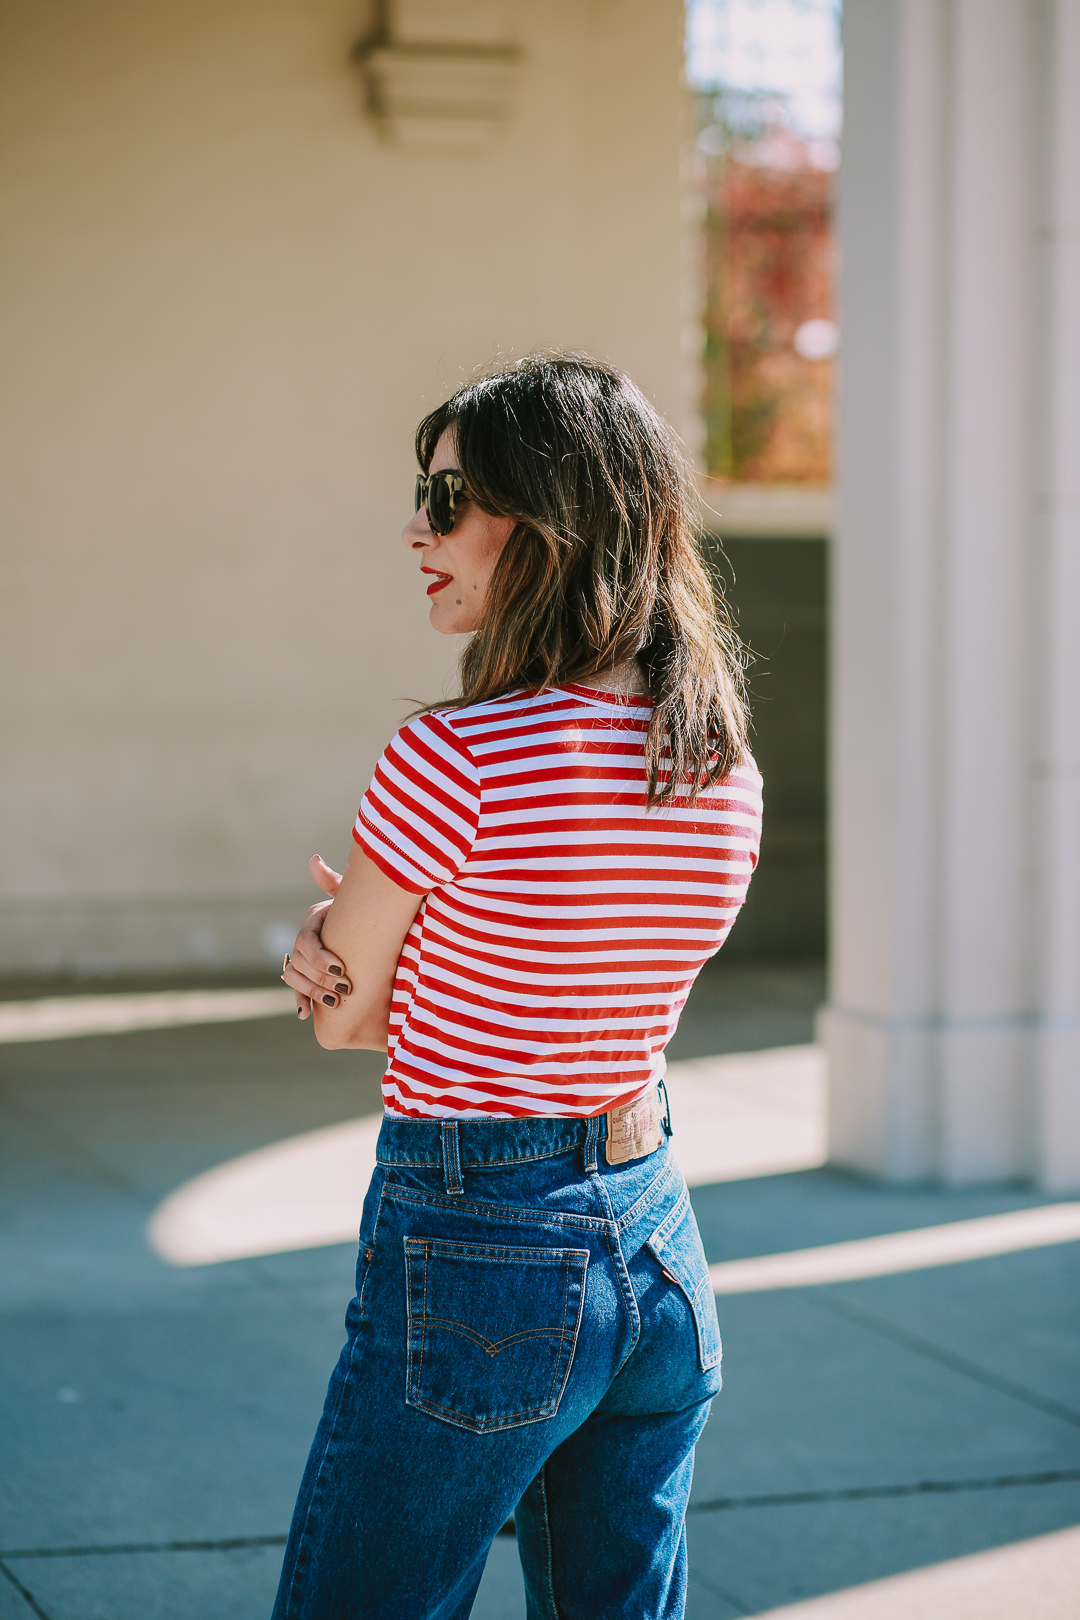 vintage levis and striped tee